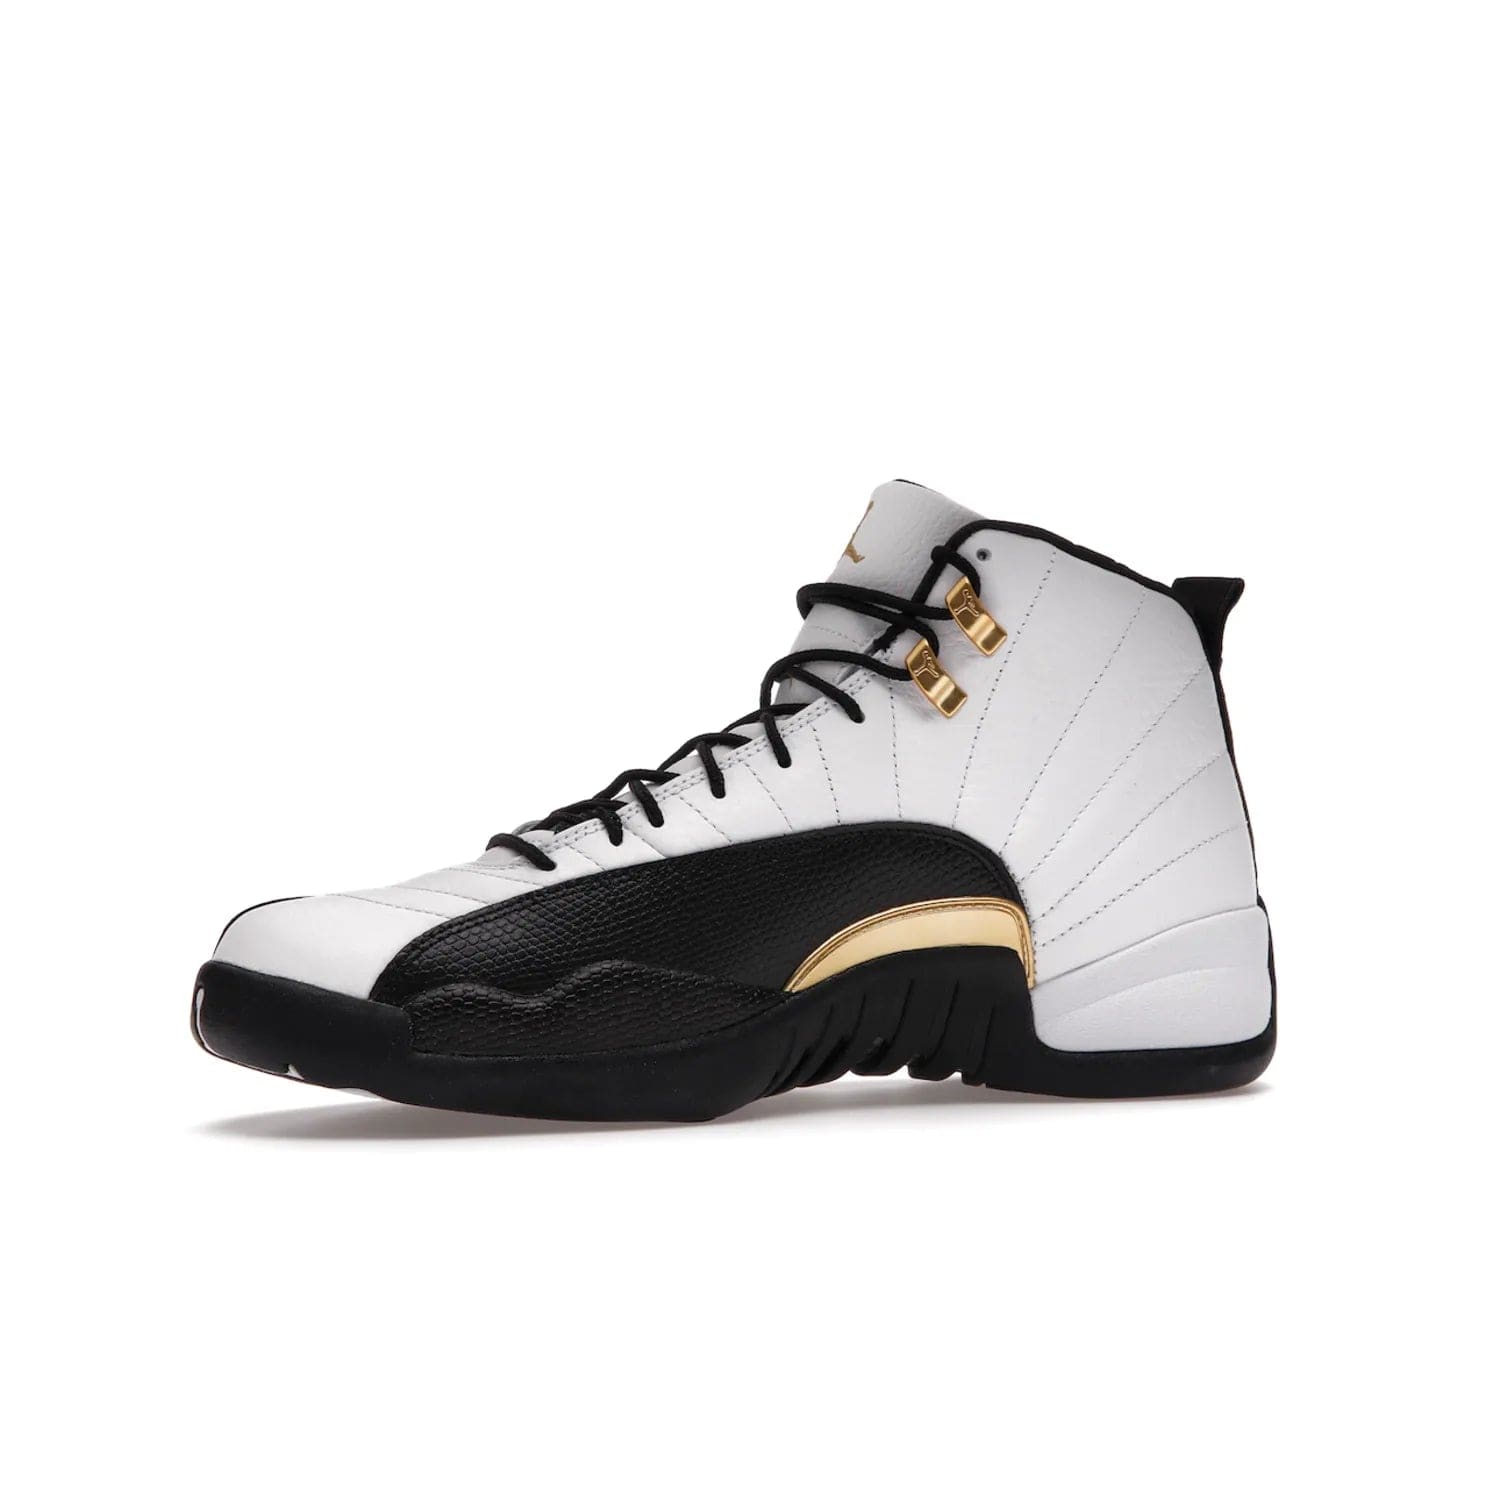 Jordan 12 Retro Royalty Taxi - Image 17 - Only at www.BallersClubKickz.com - Make a statement with the Air Jordan 12 Retro Royalty Taxi. Woven heel tag, gold plaquet, white tumbled leather upper plus a black toe wrap, make this modern take on the classic a must-have. Available in November 2021.